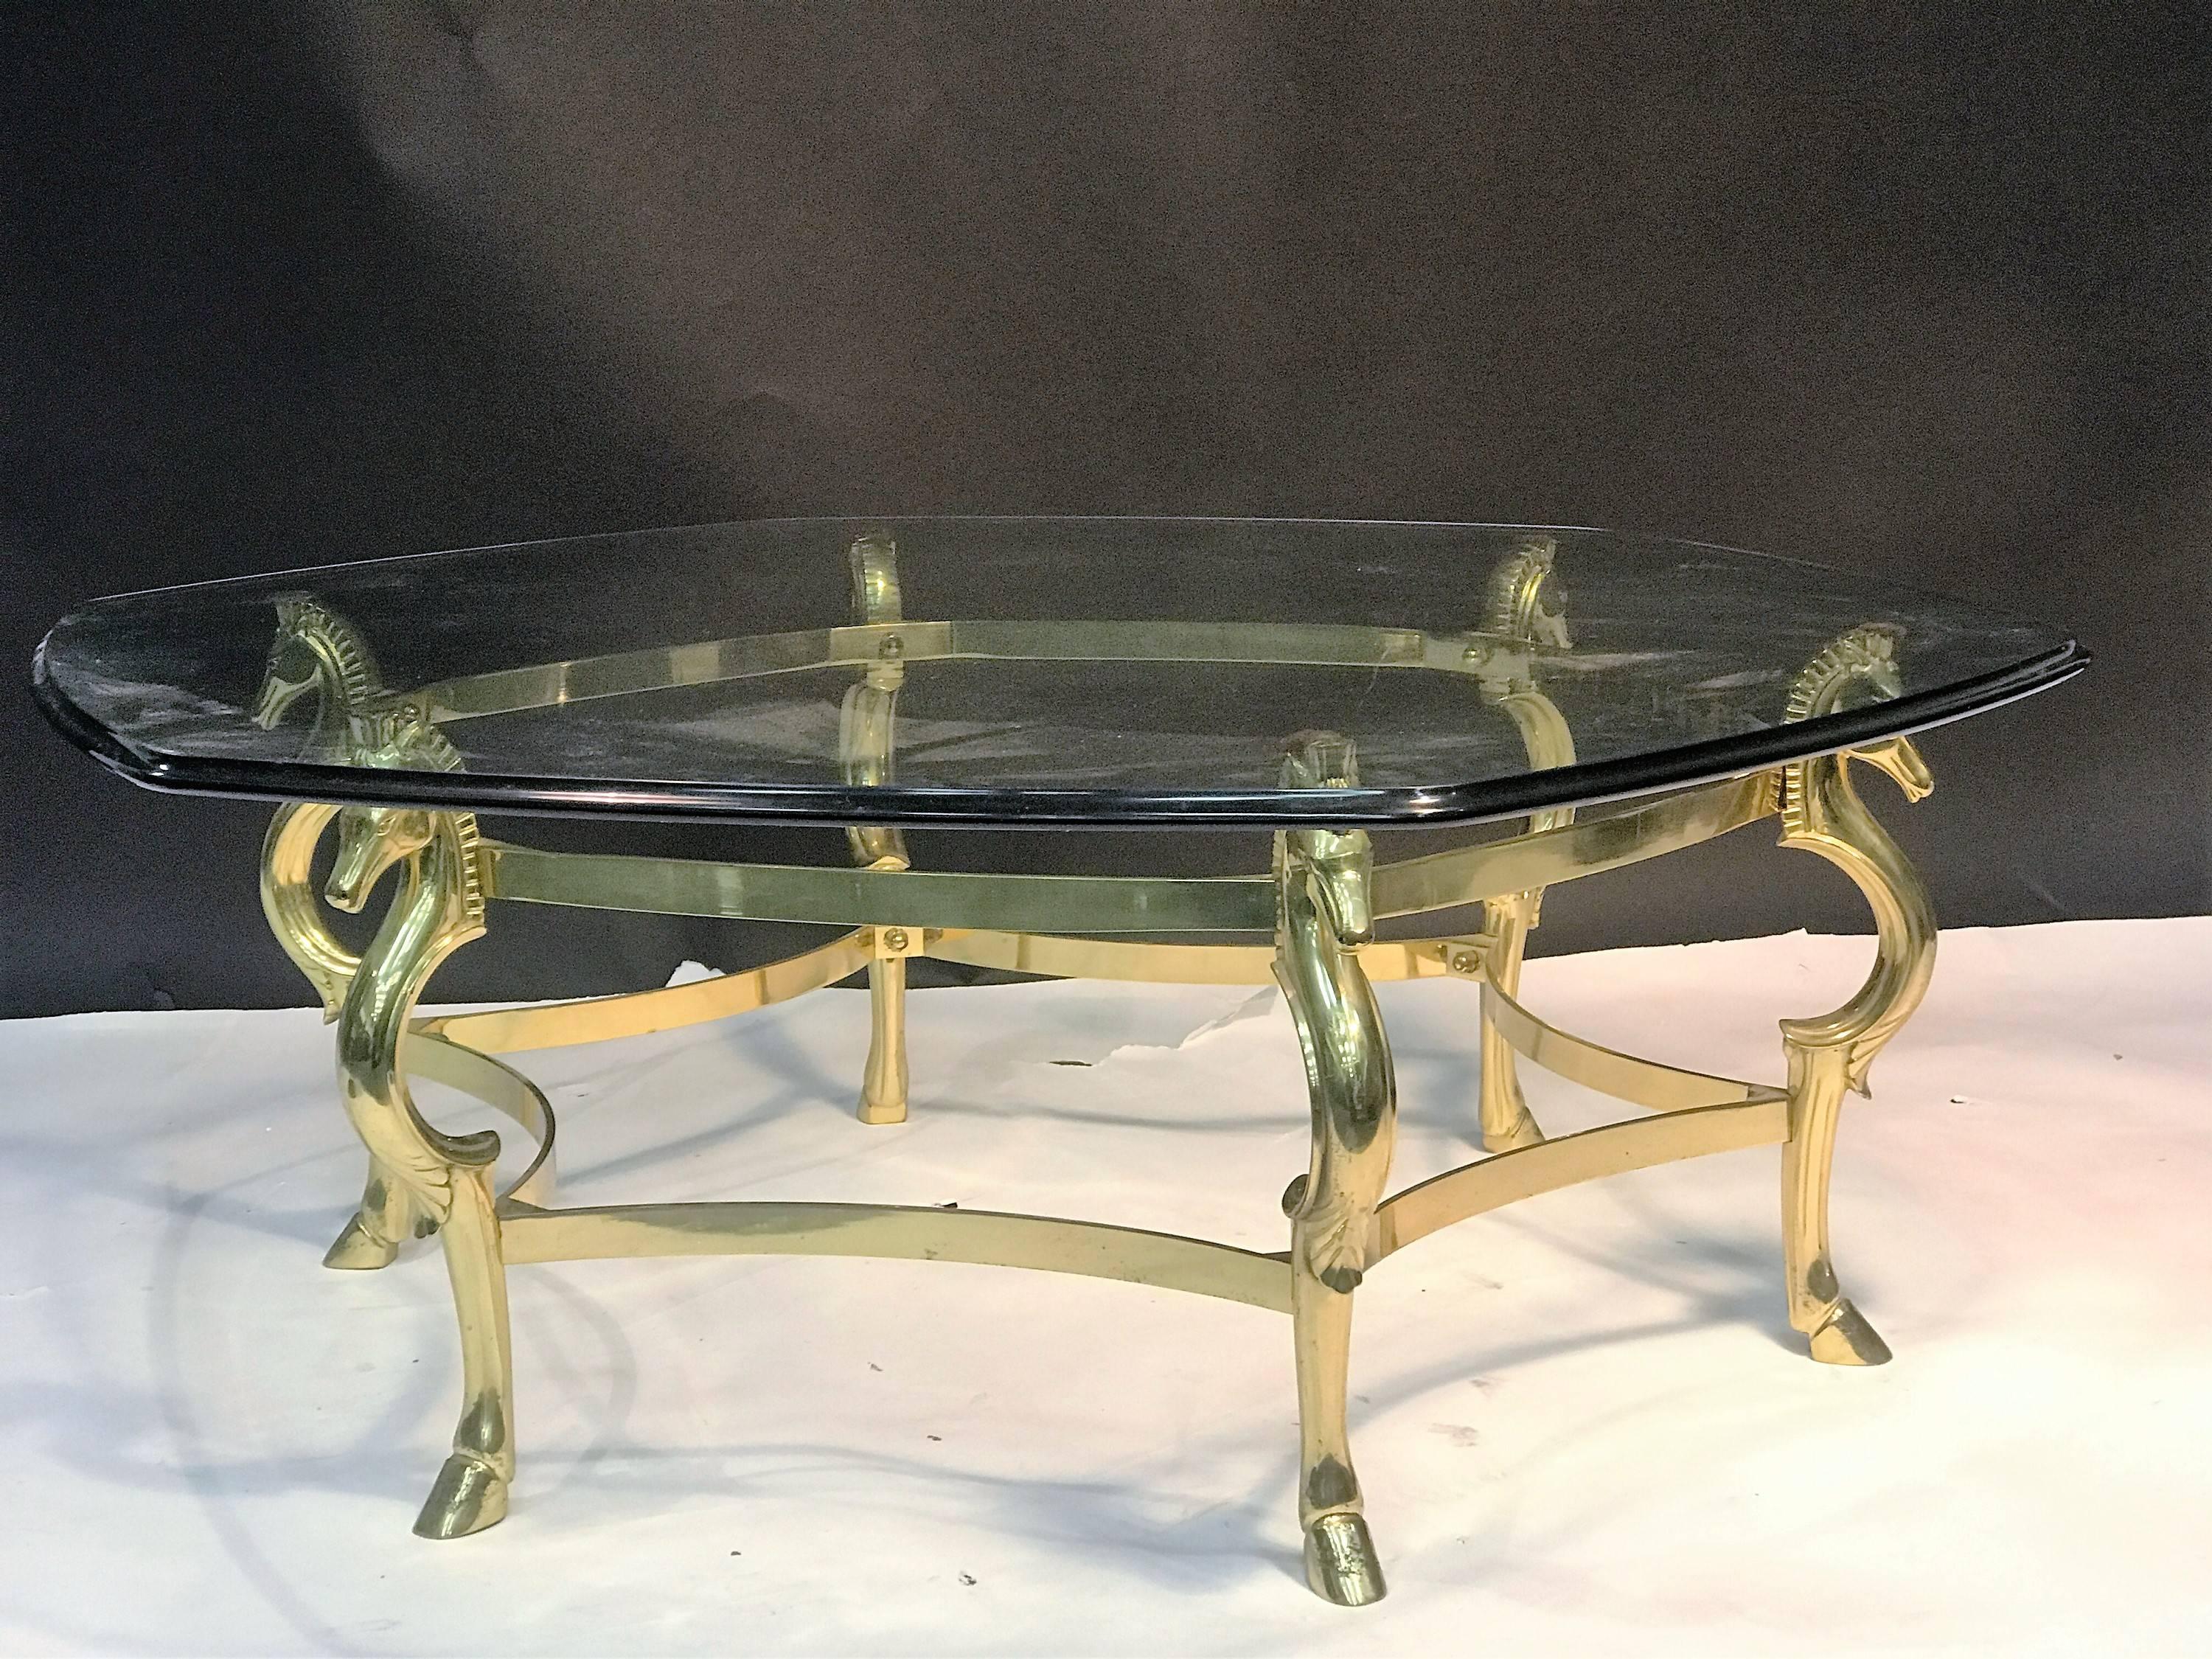 Stunning cast brass six sided seahorse and hooves coffee table with beautiful beveled glass top. Jewelry like polished brass that would be perfect in a high end eclectic modern interior. The beveled polished glass top is 3/4